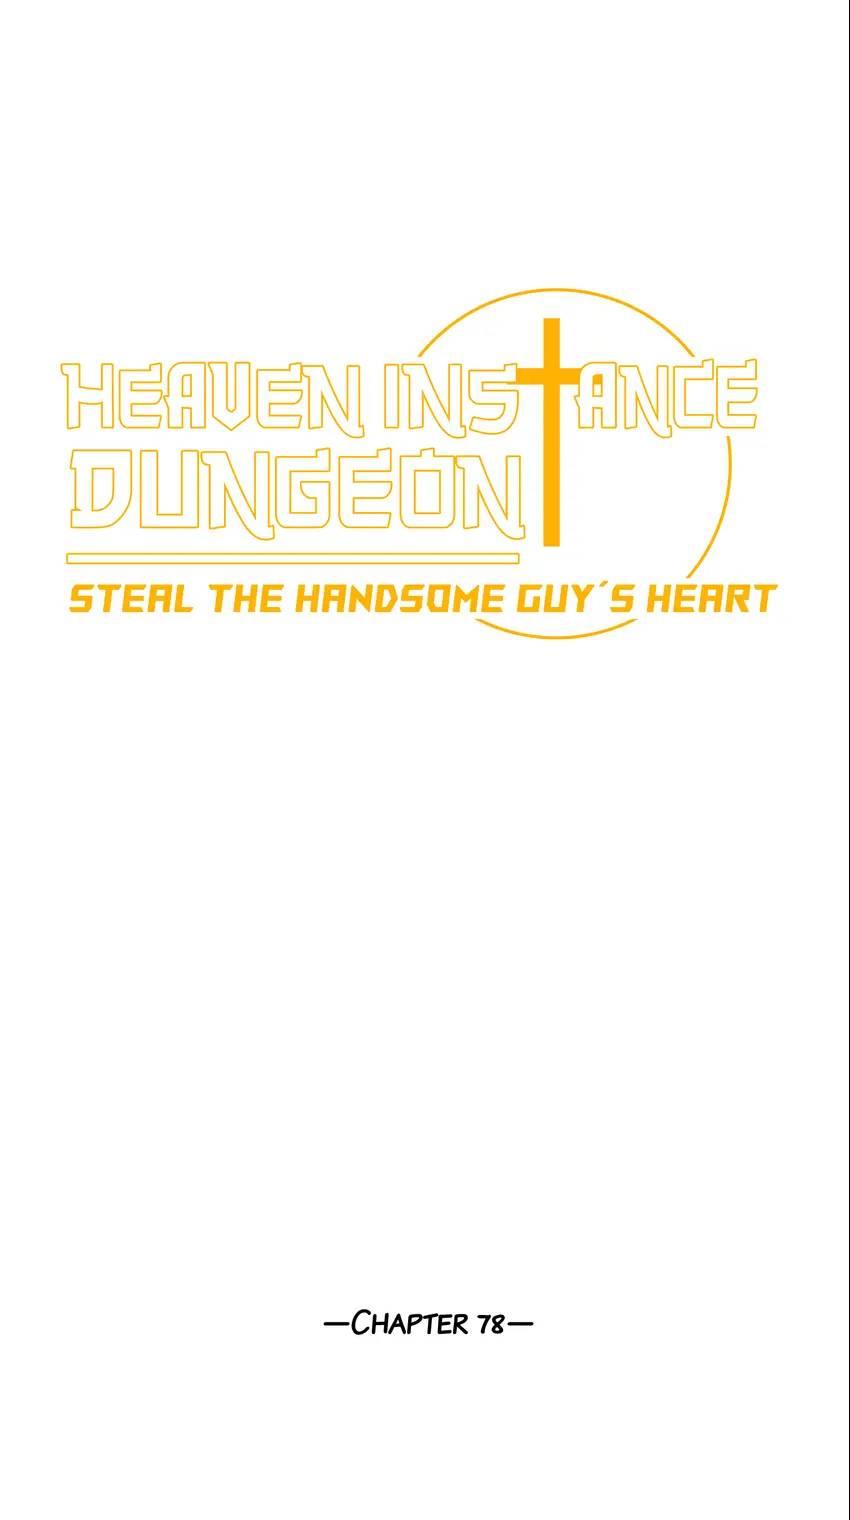 Heaven Instance Dungeon - Steal The Handsome Guy’S Heart - Page 2